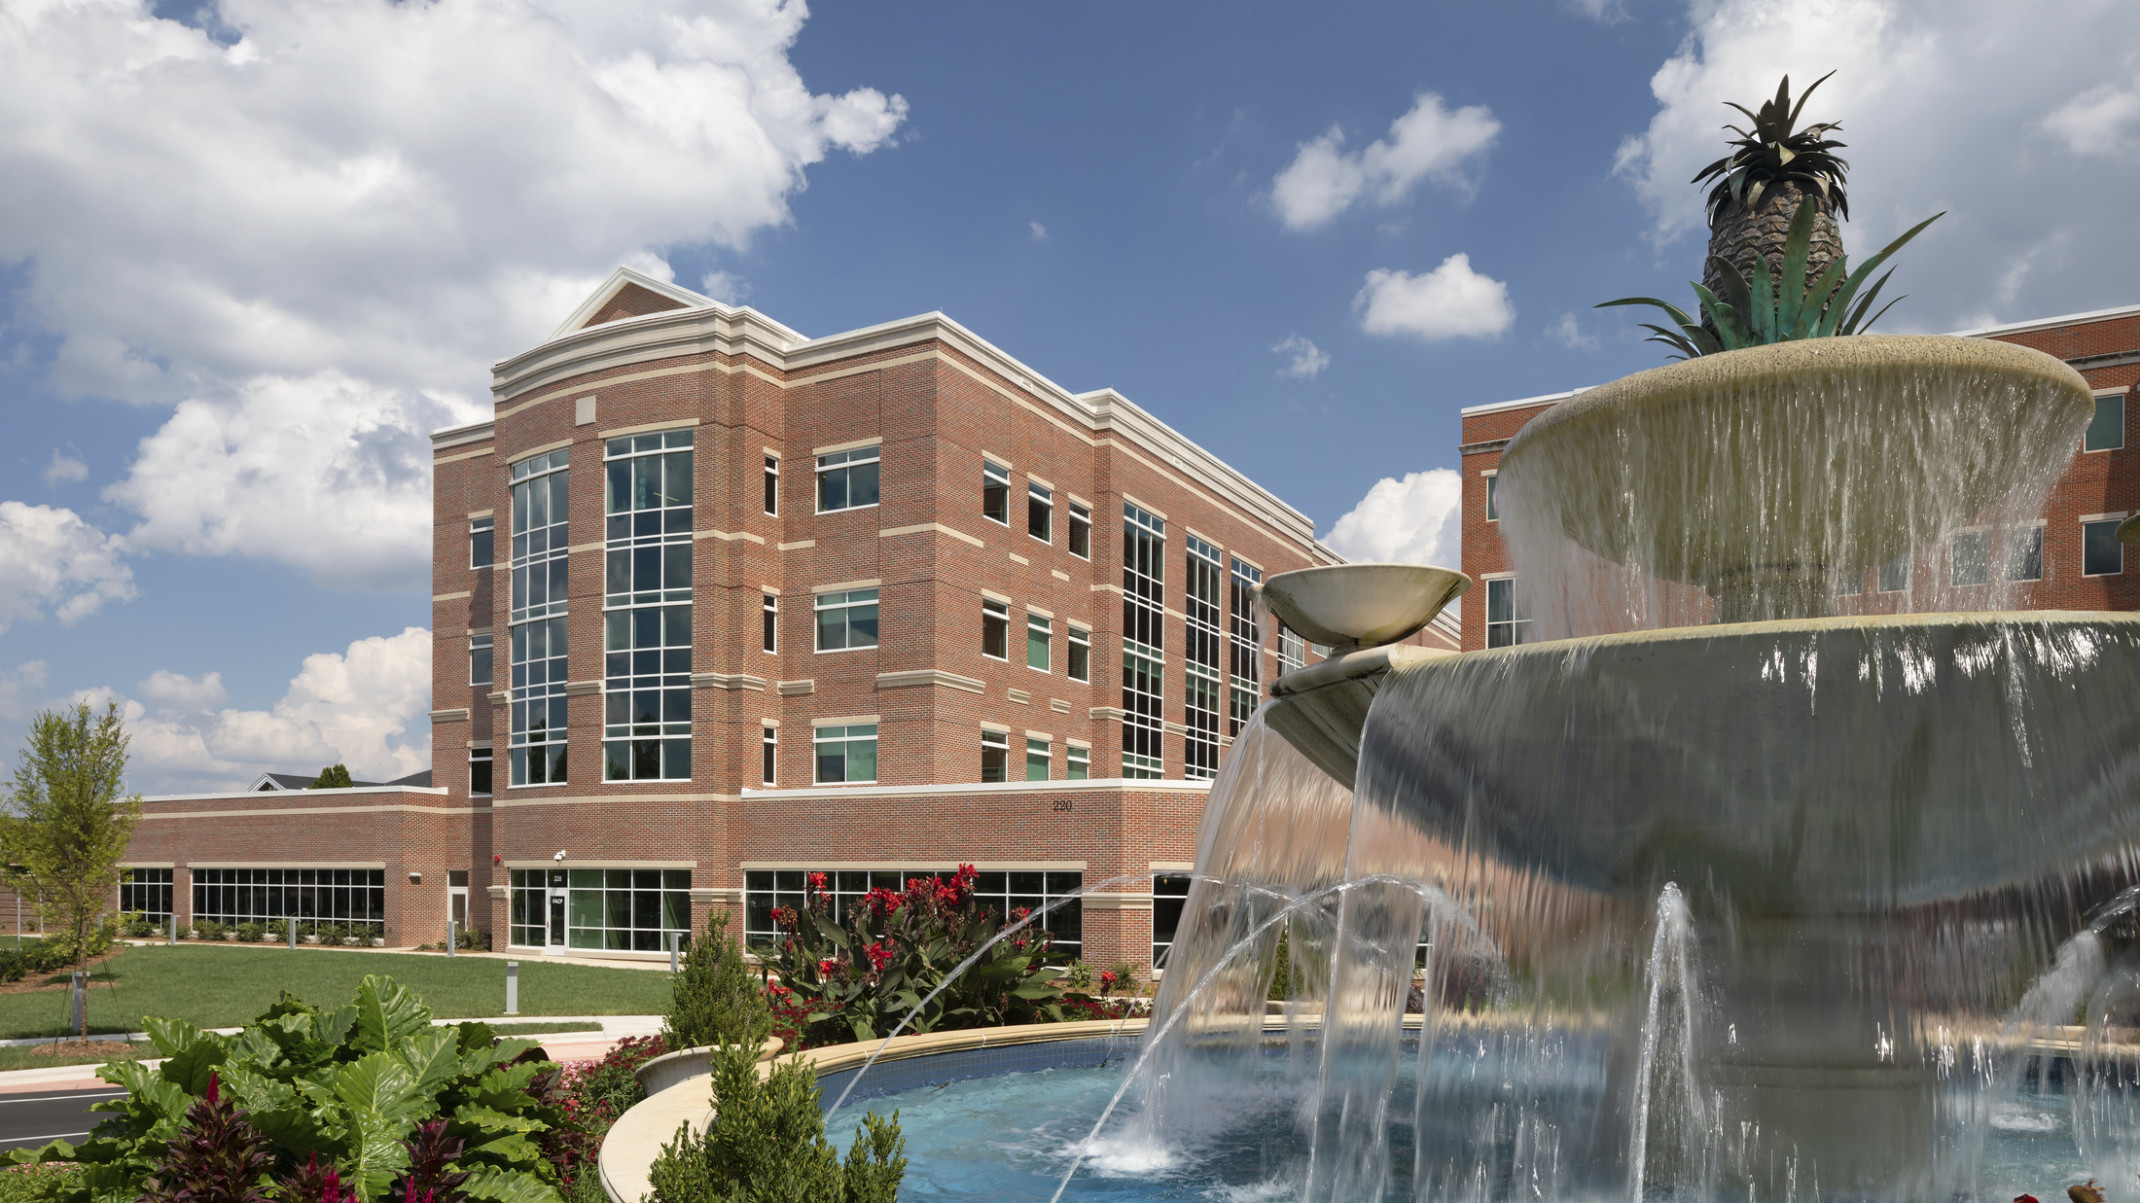 Atrium Health Cabarrus exterior, a brick building with windows along central tower. Landscaped grounds with stepped fountain